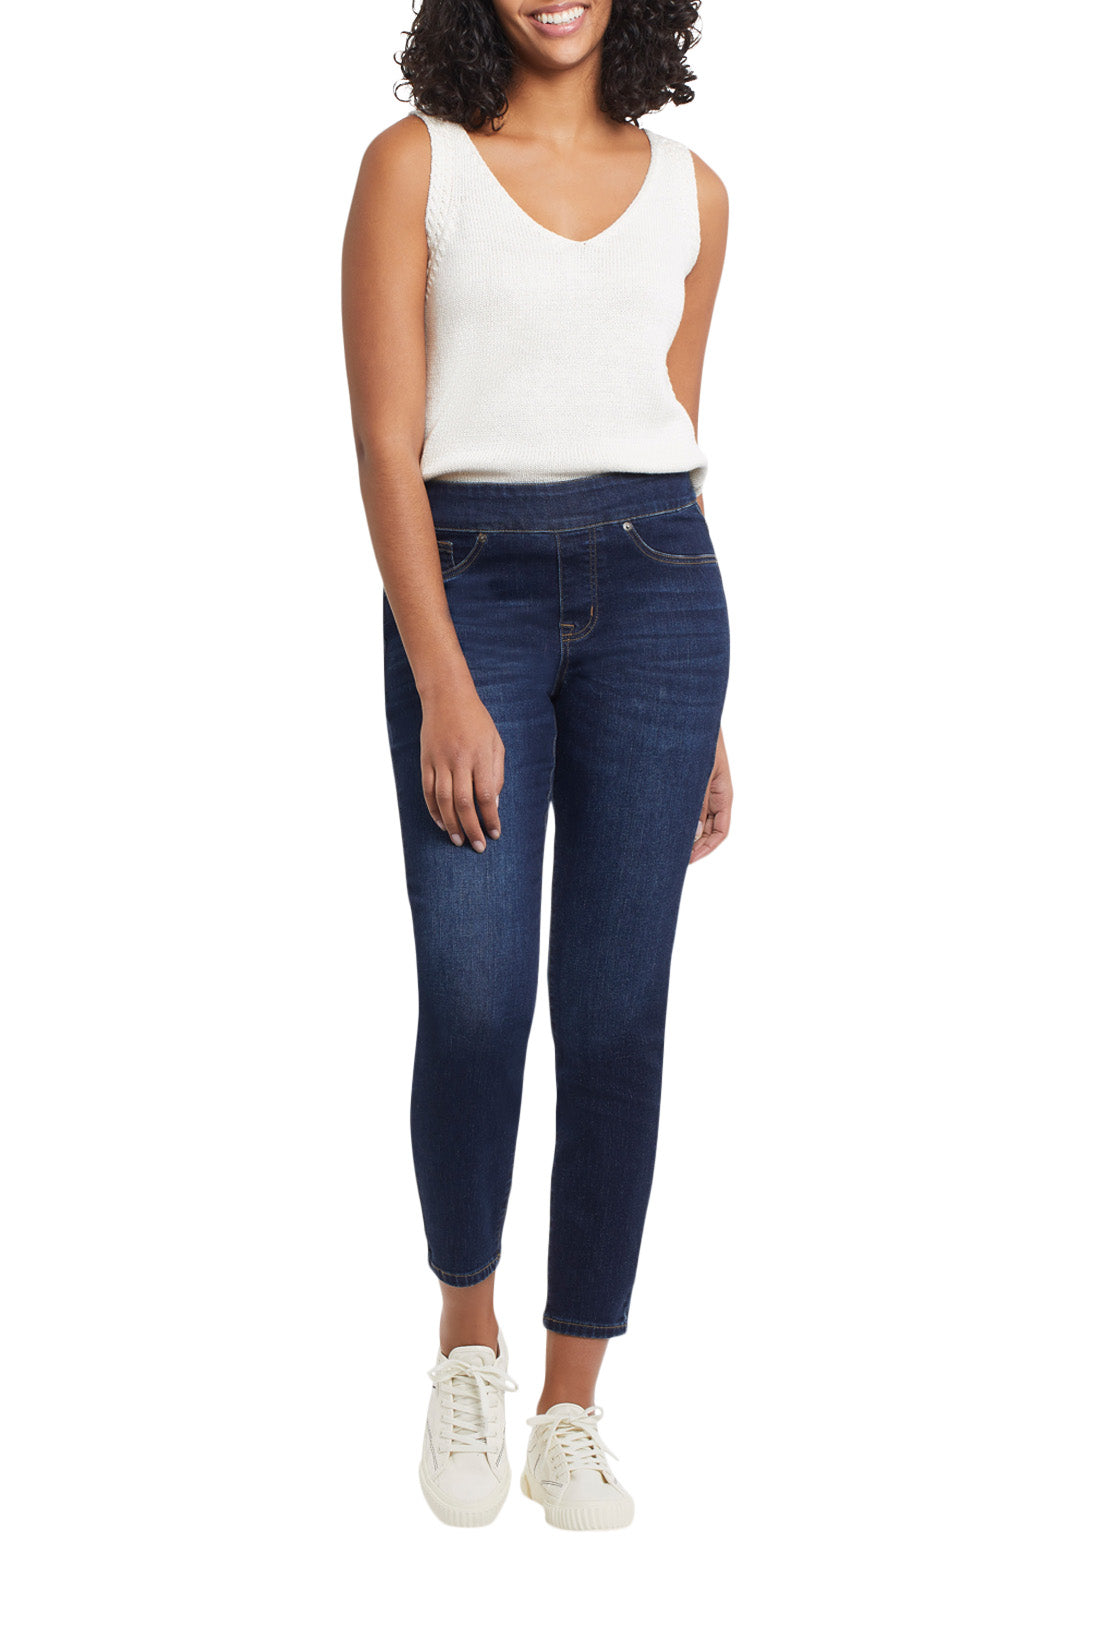 Tribal Audrey Pull-on Jegging -Dream Jean